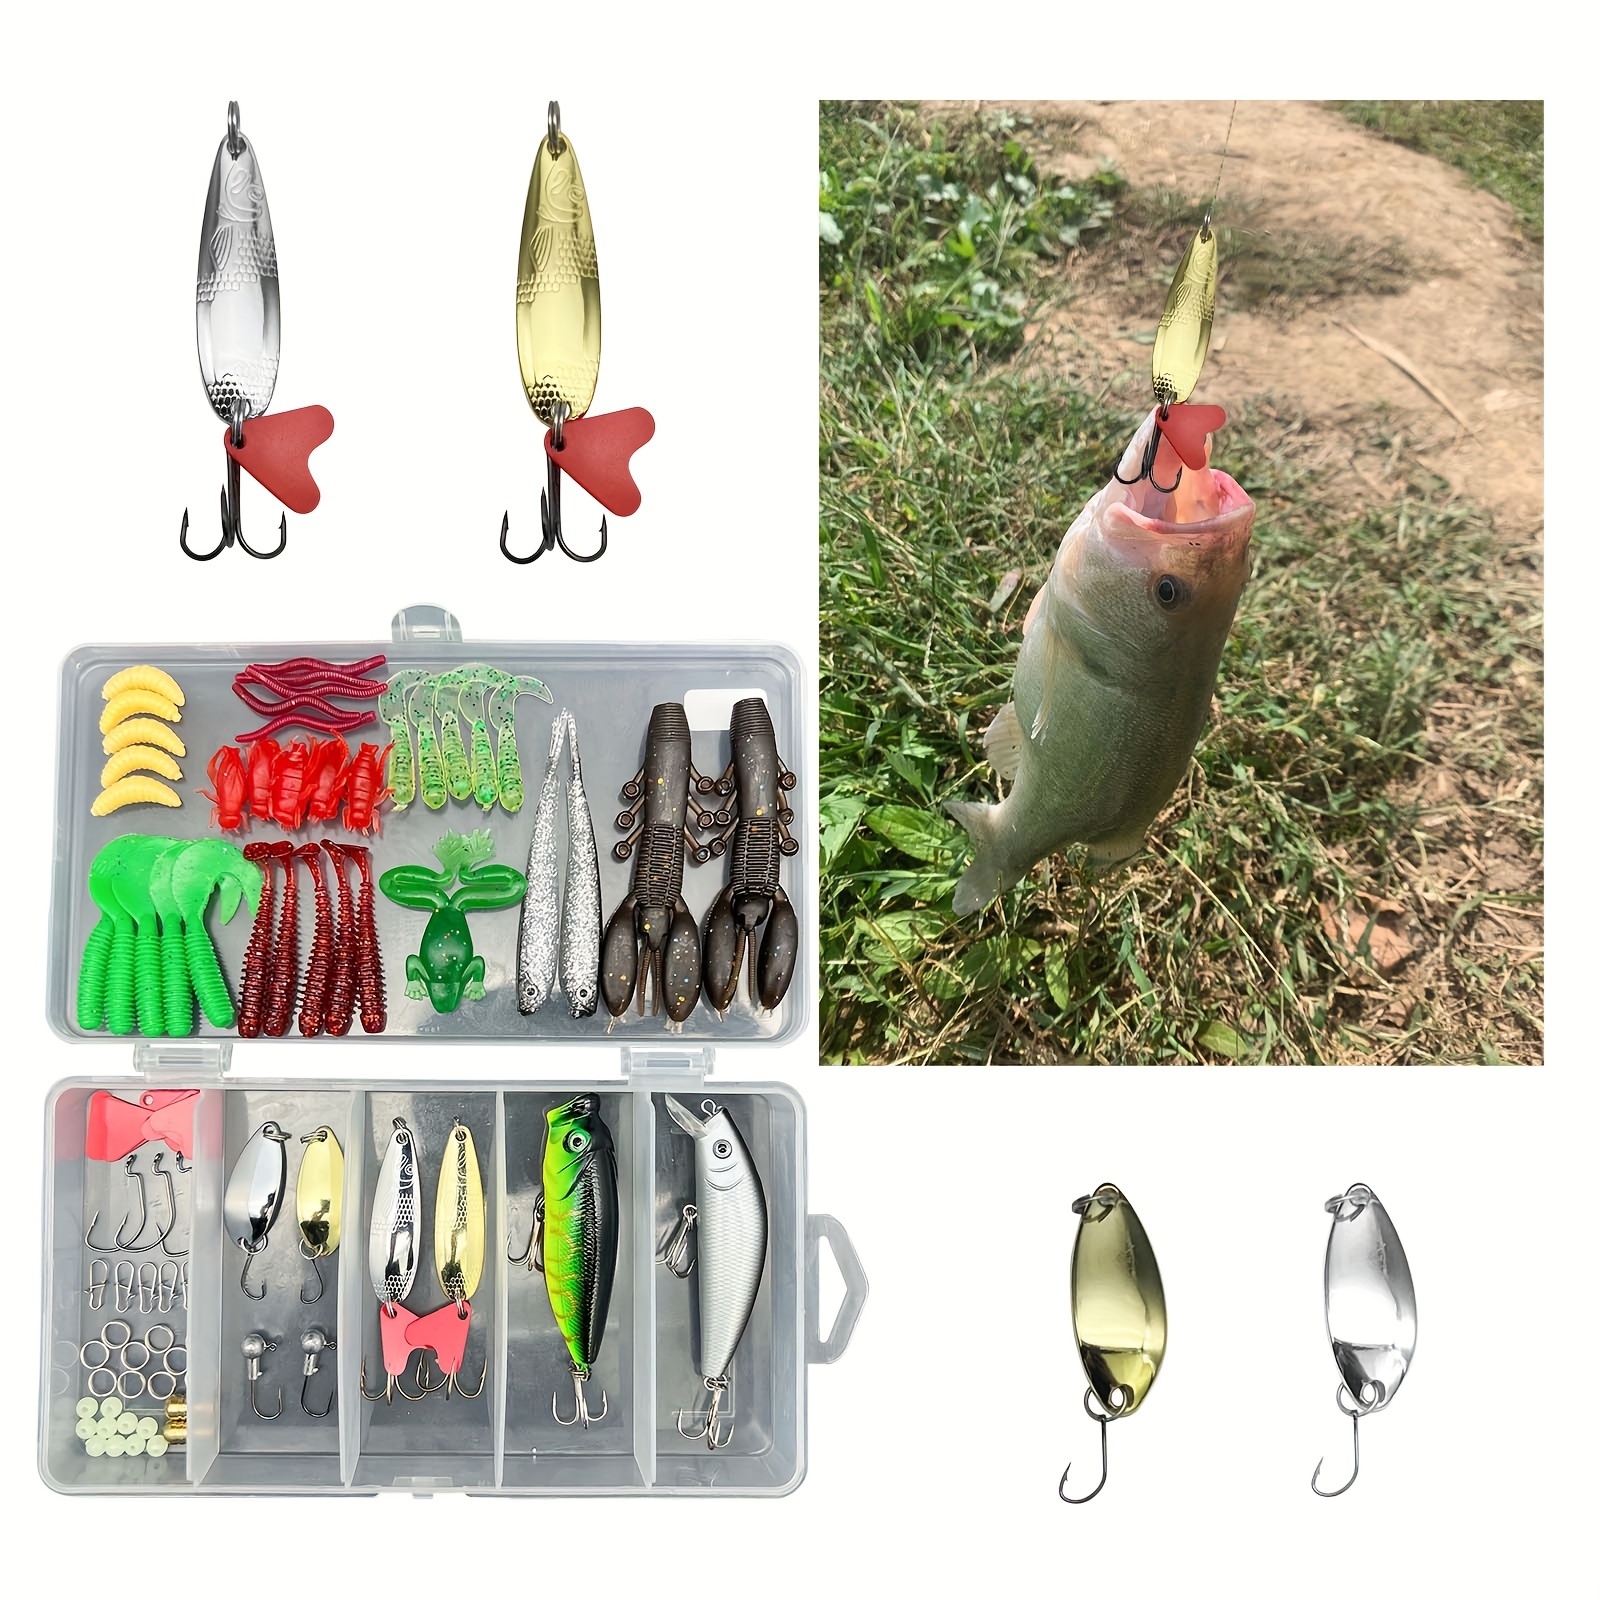 Isafish Fishing Tackle Set, Fishing Lures Kit Set for Bass, Trout, Salmon,  Including Spoon Lures, Soft Plastic Worms, CrankBait, Jigs, Topwater Lures